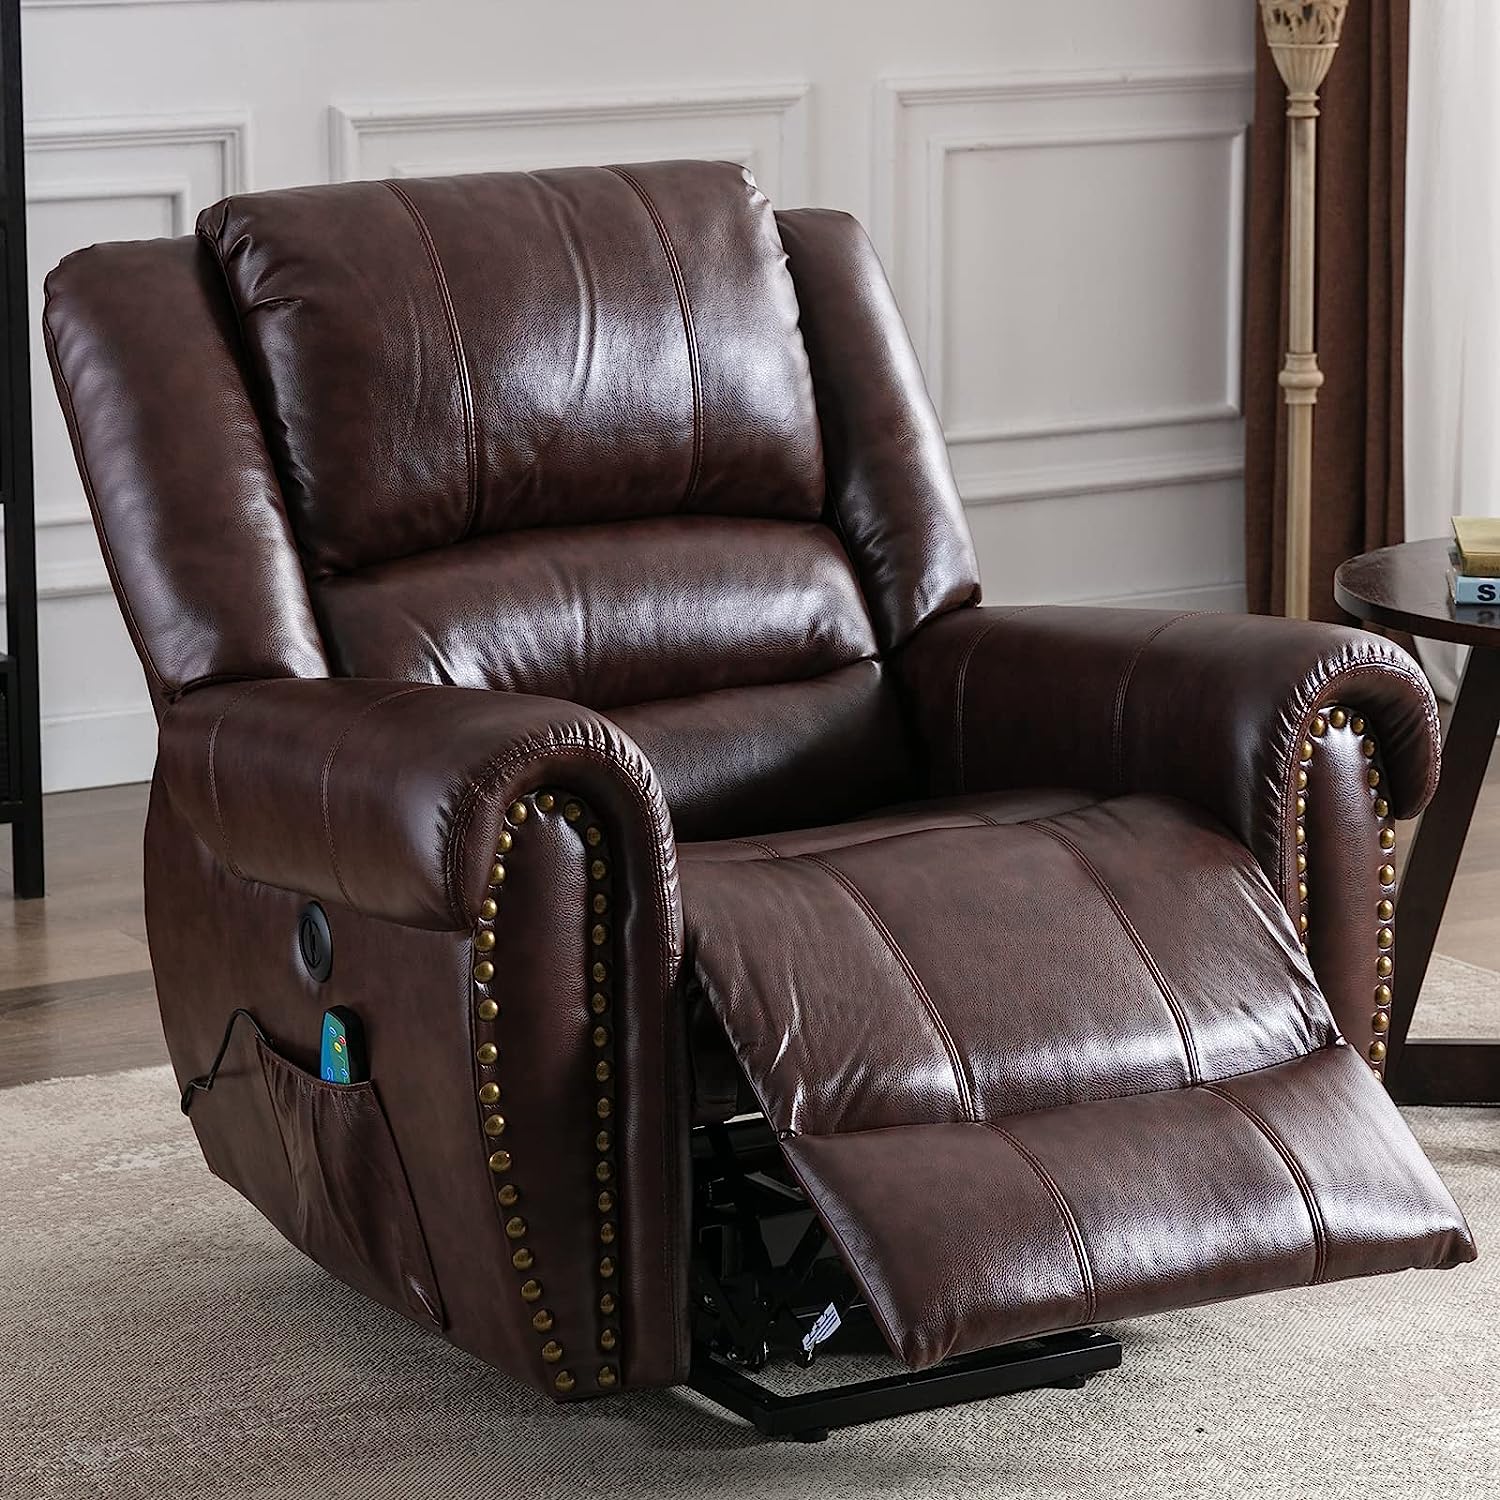 ANJ Large Power Lift Recliner Chairs with Massage and [...]